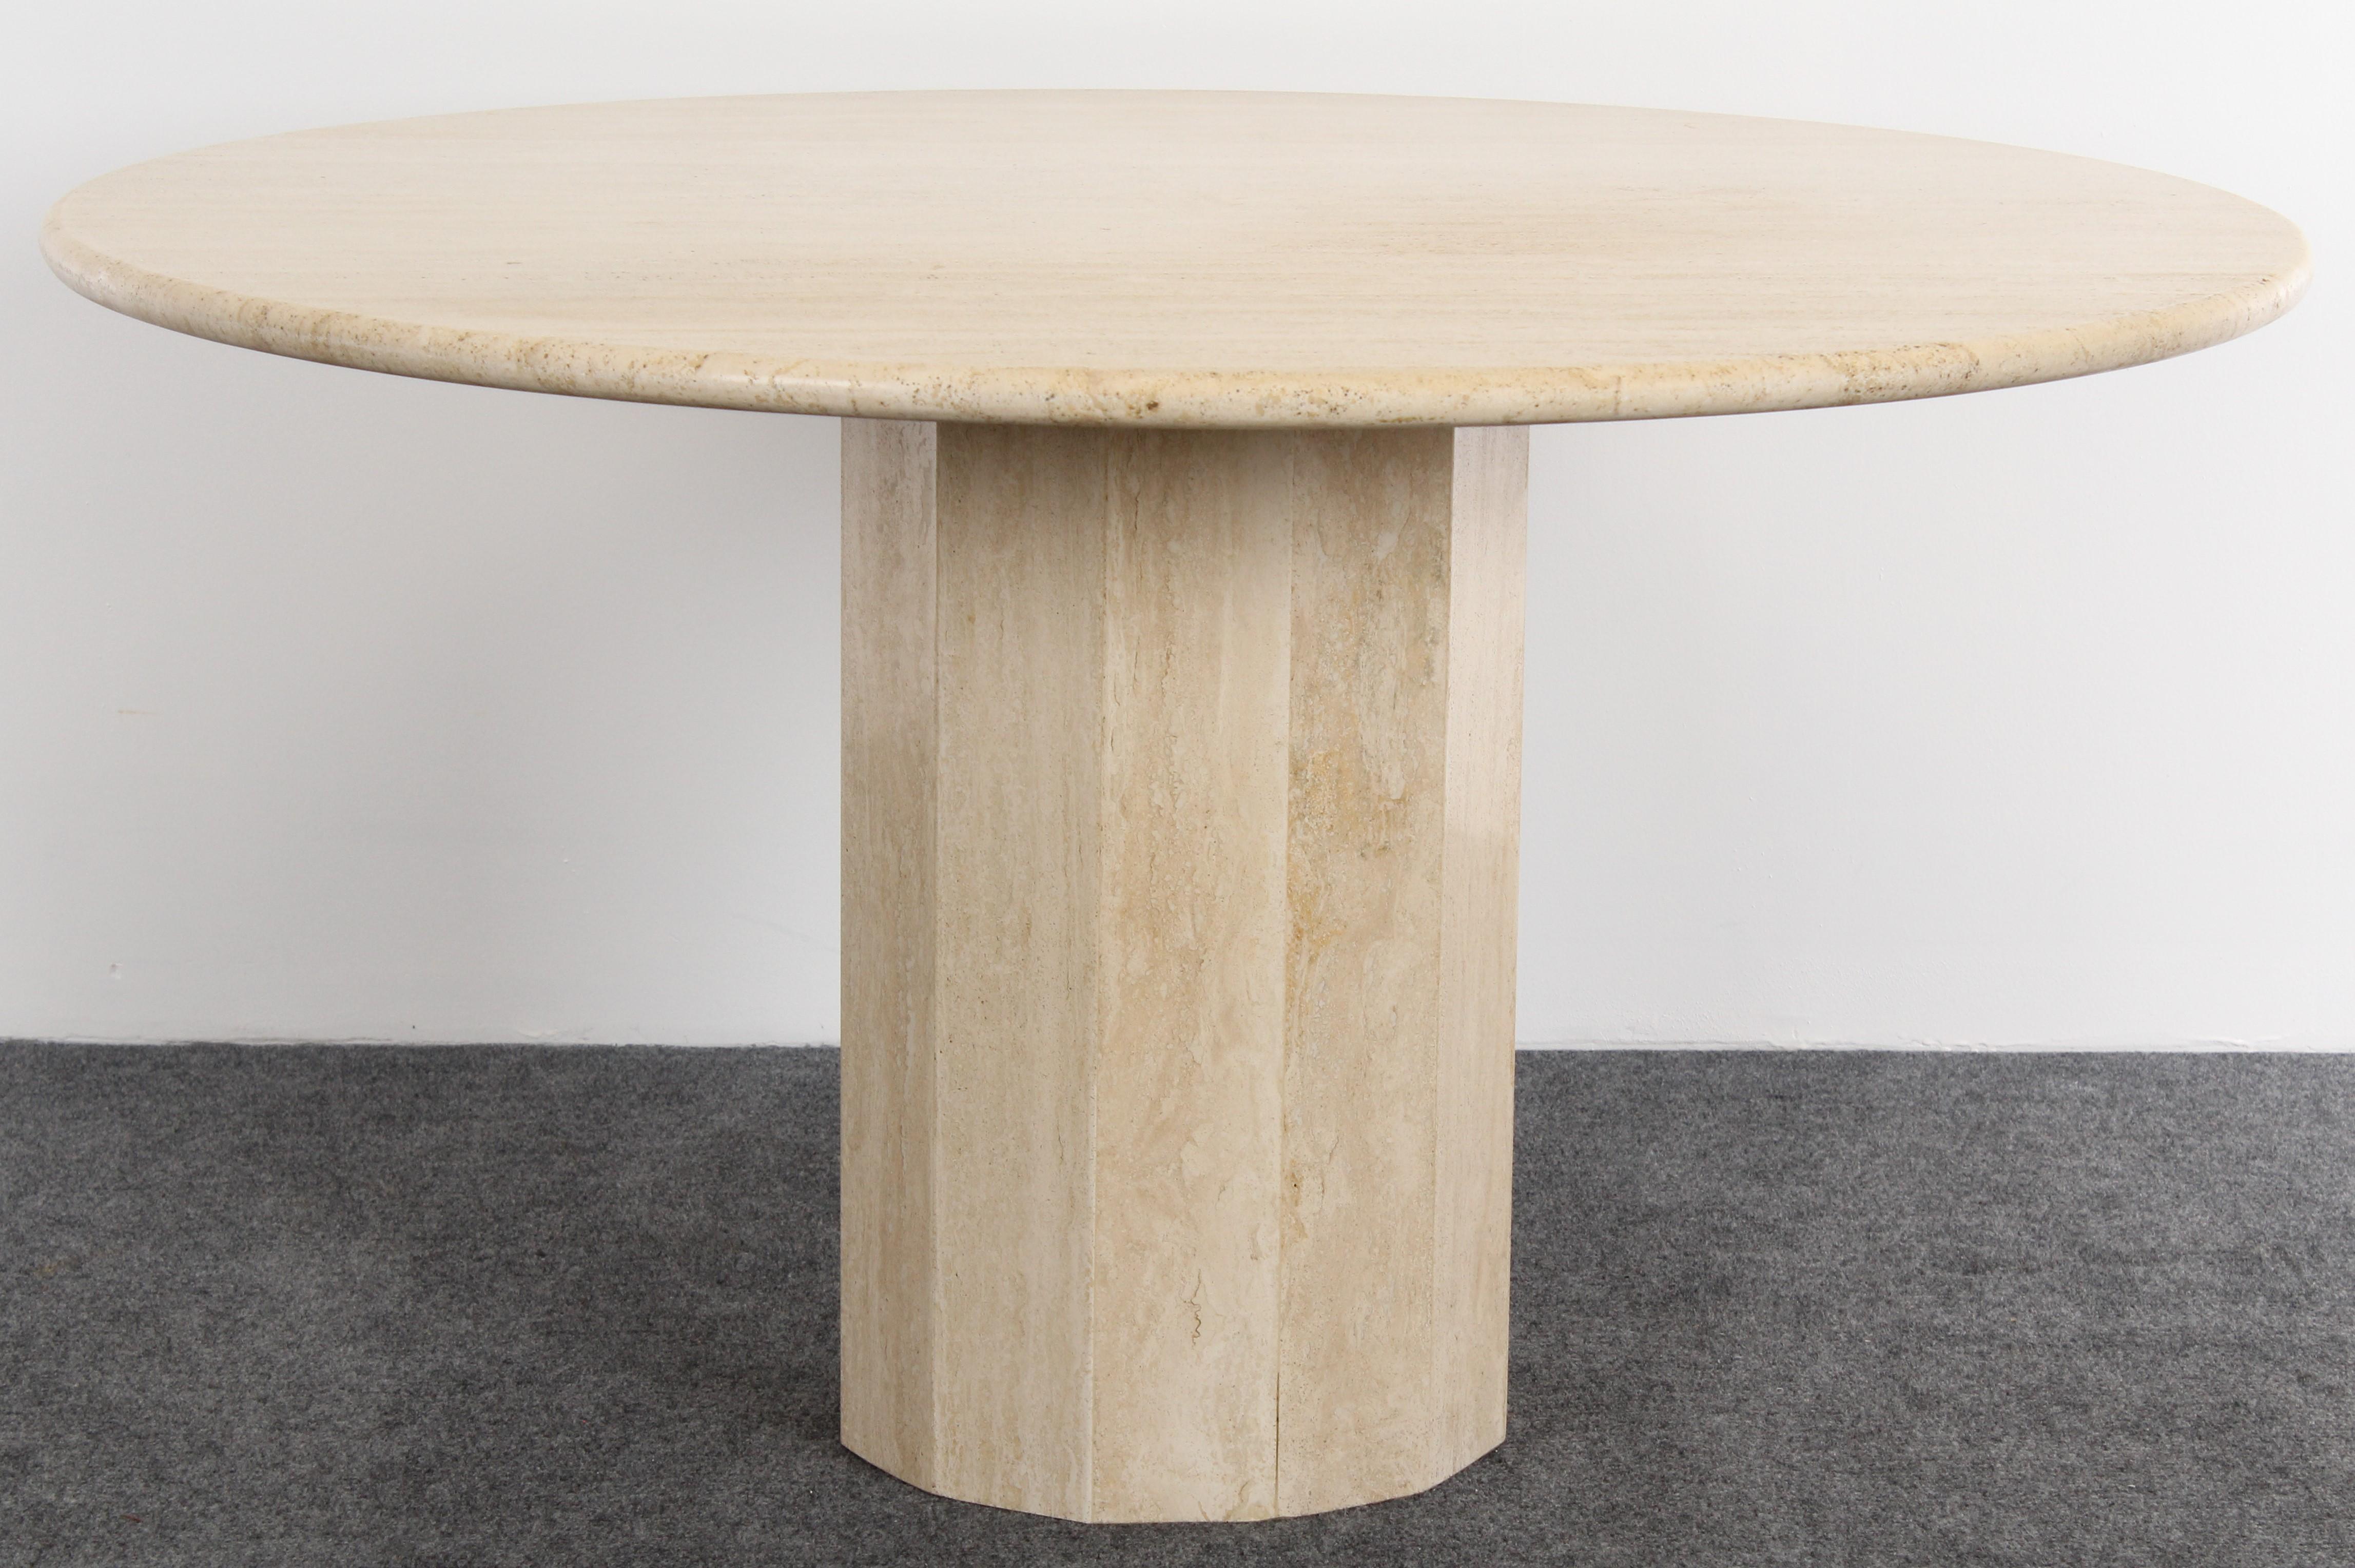 A Classic Mid-Century Modern round Roche Bobois Style Italian travertine dining table on a trapezium pedestal base, 1970s. The table has a simple rounded bull nose edge. Good condition with age appropriate wear.